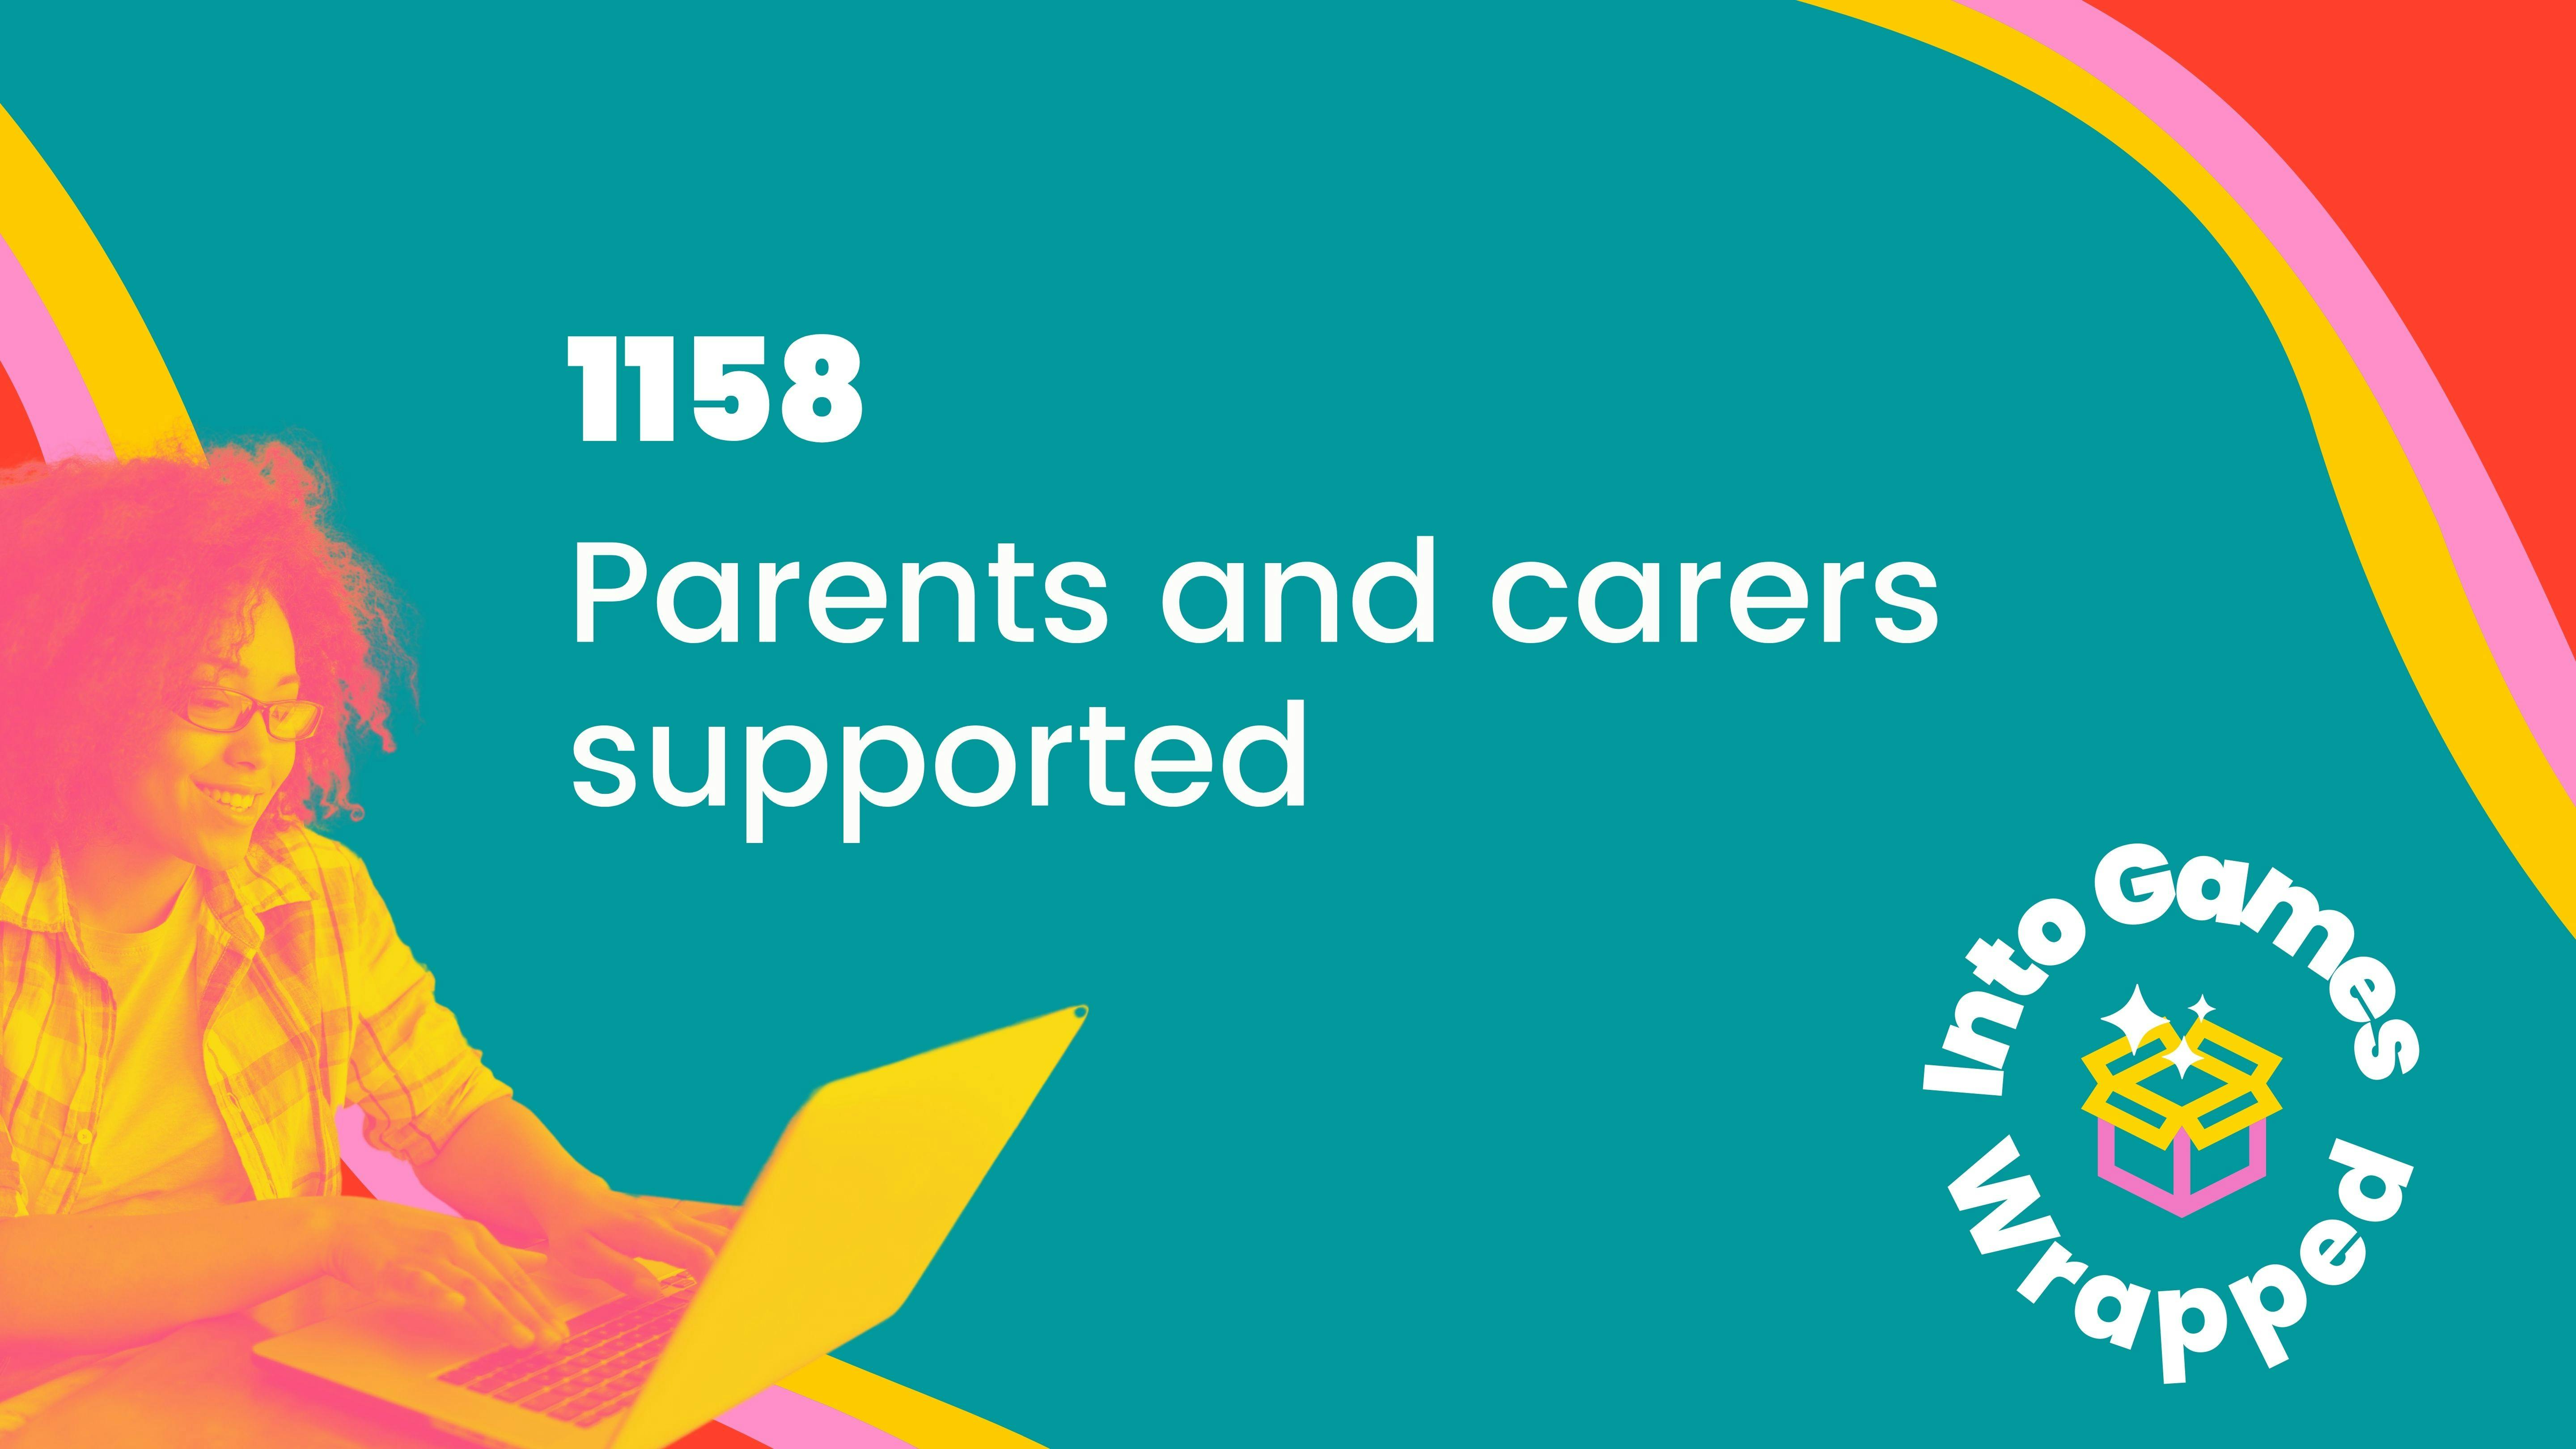 1158 parents and carers supported